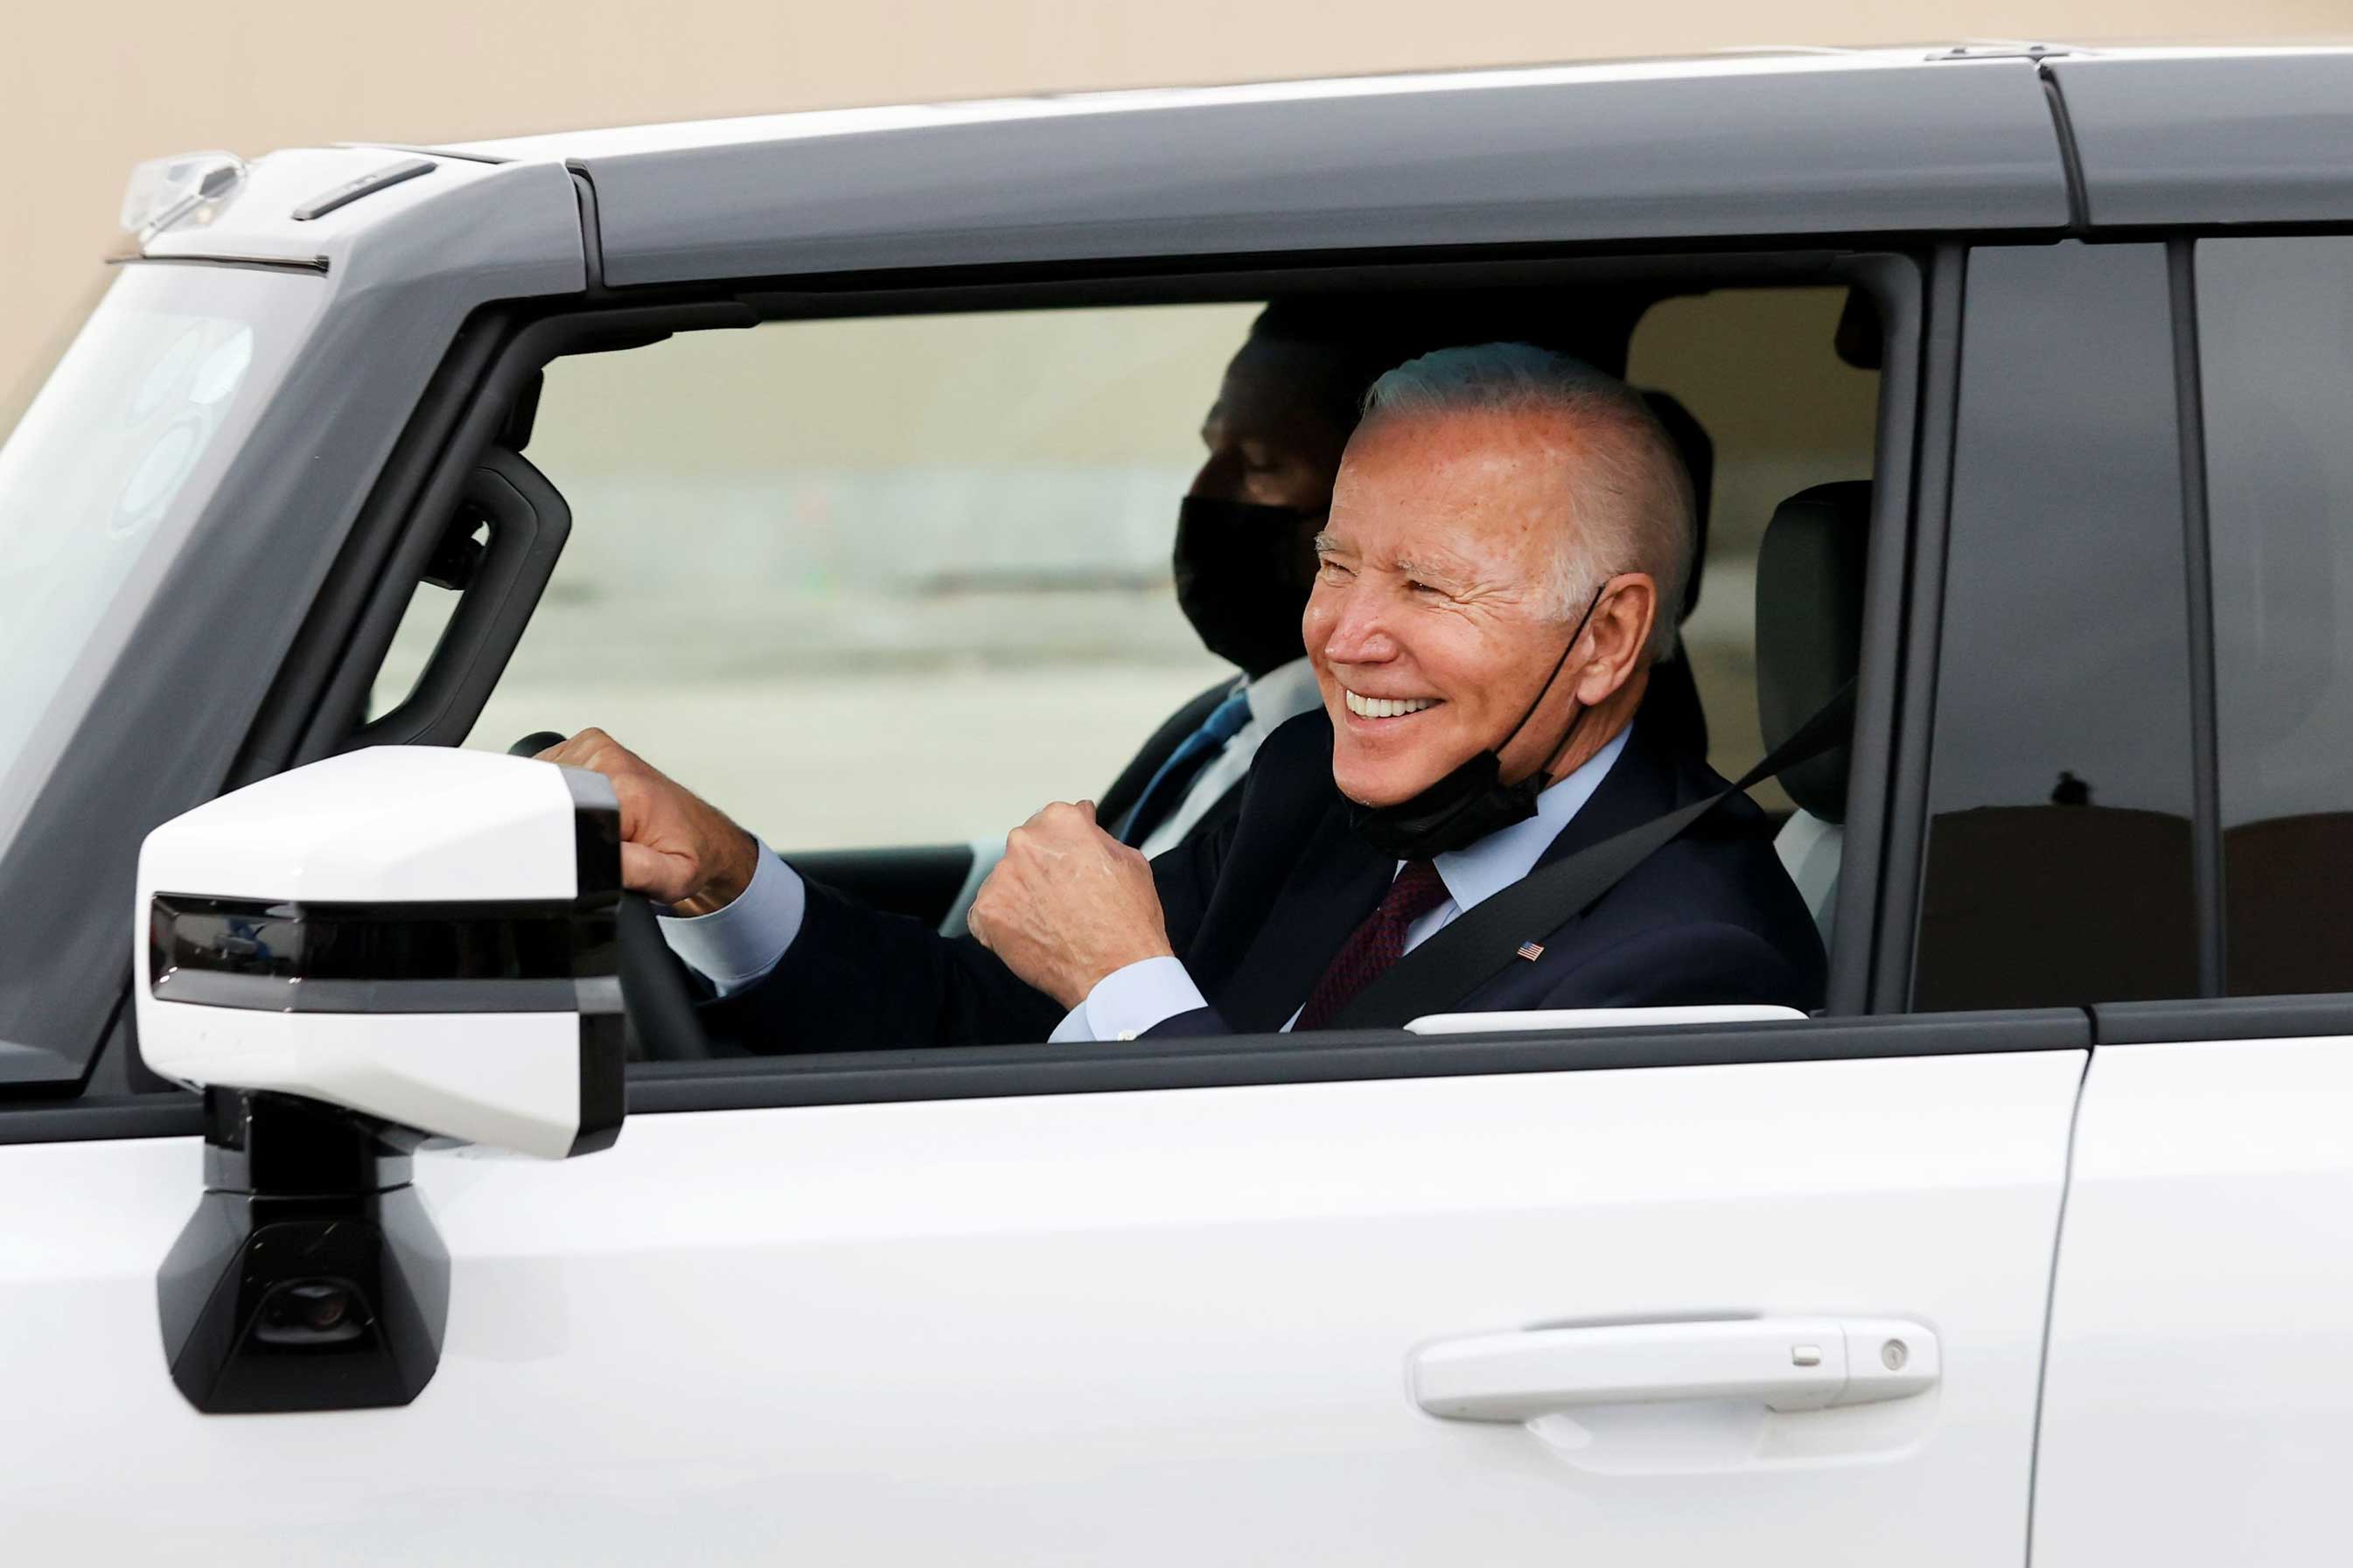 Biden Administration Announces $3.1 Billion to Make Electric Vehicle
Batteries in the U.S.